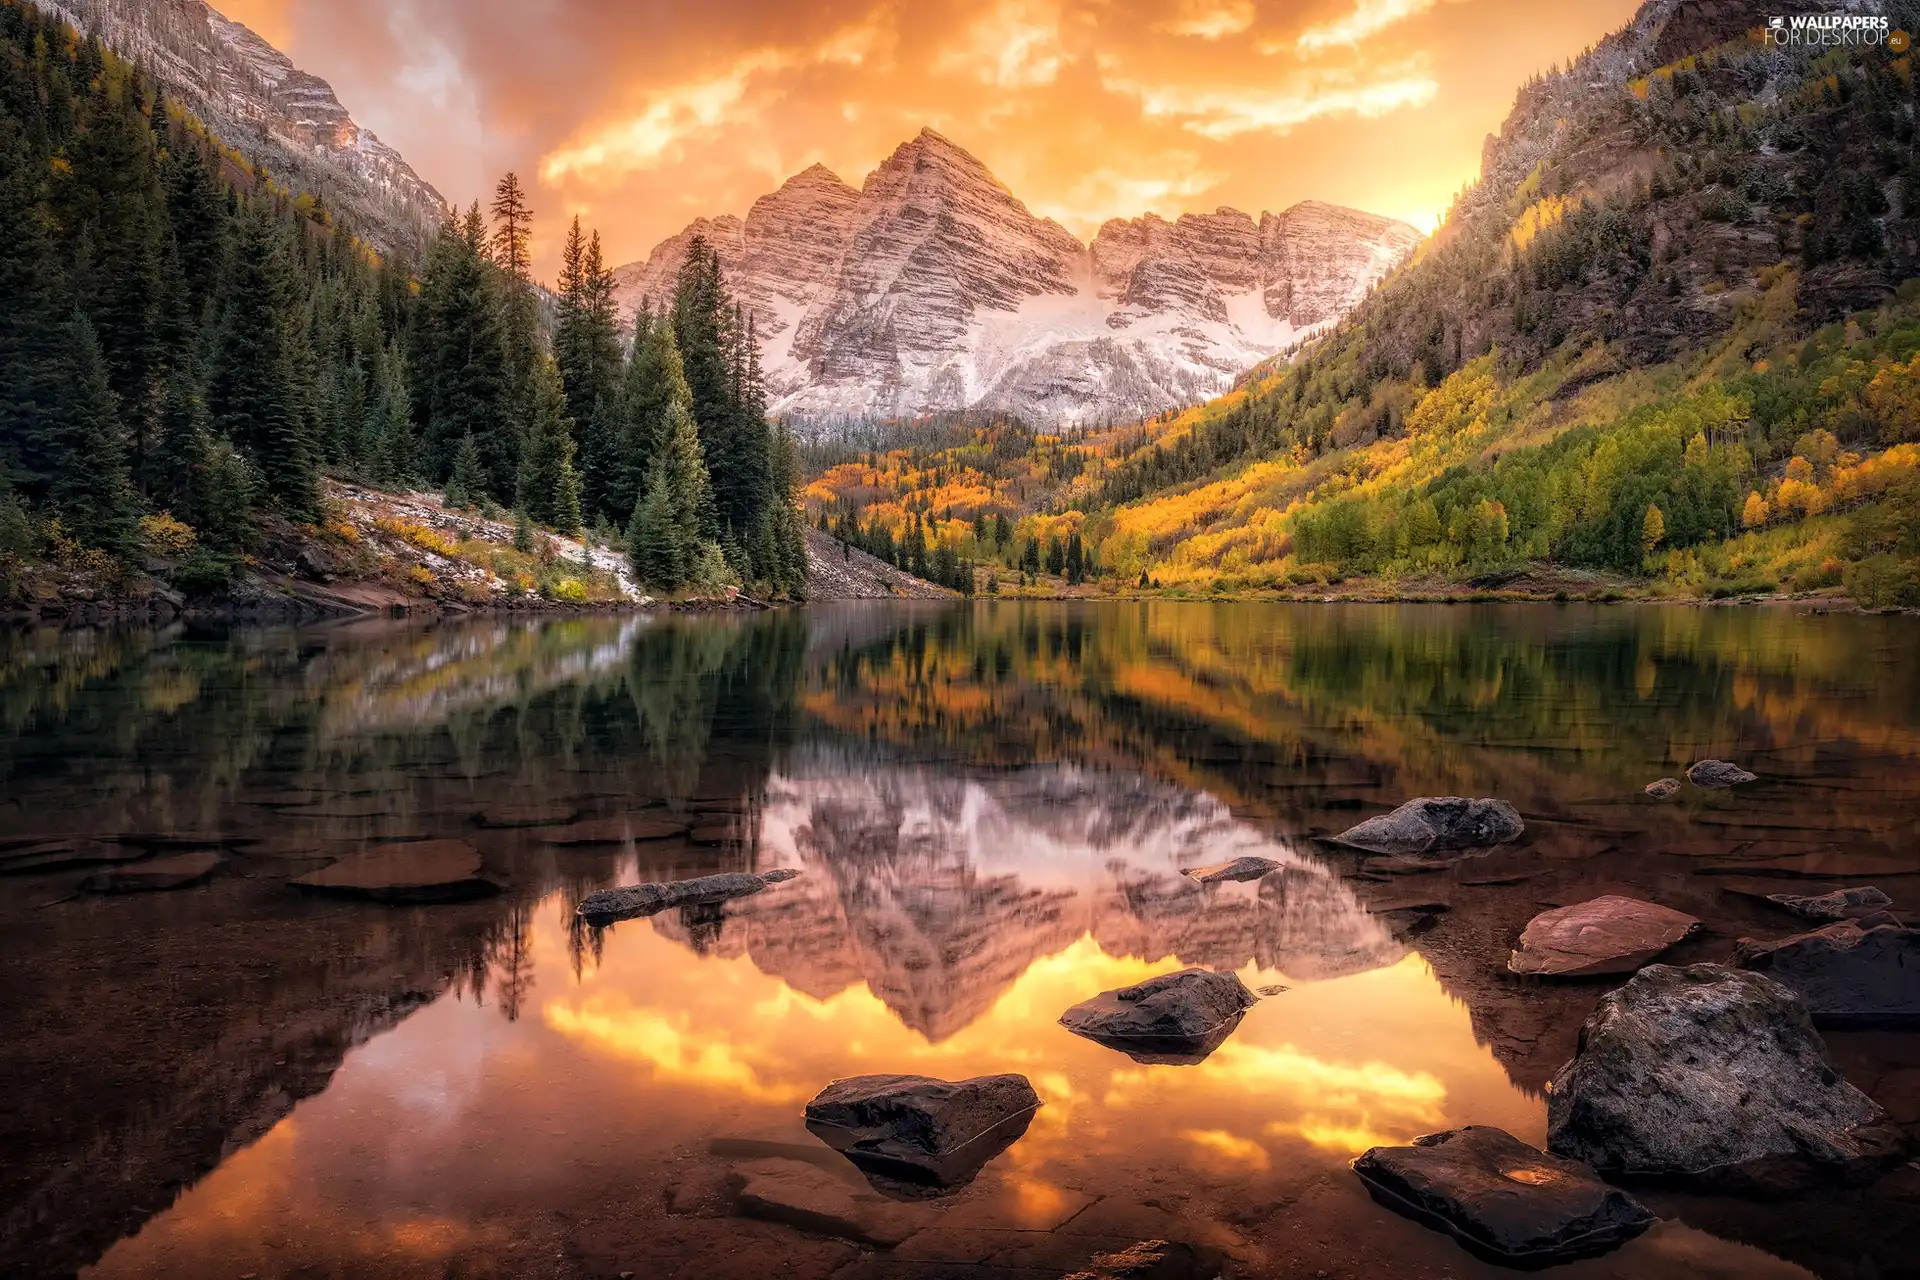 Maroon Bells Peaks, rocky mountains, Maroon Lake, State of Colorado, Stones, reflection, trees, viewes, The United States